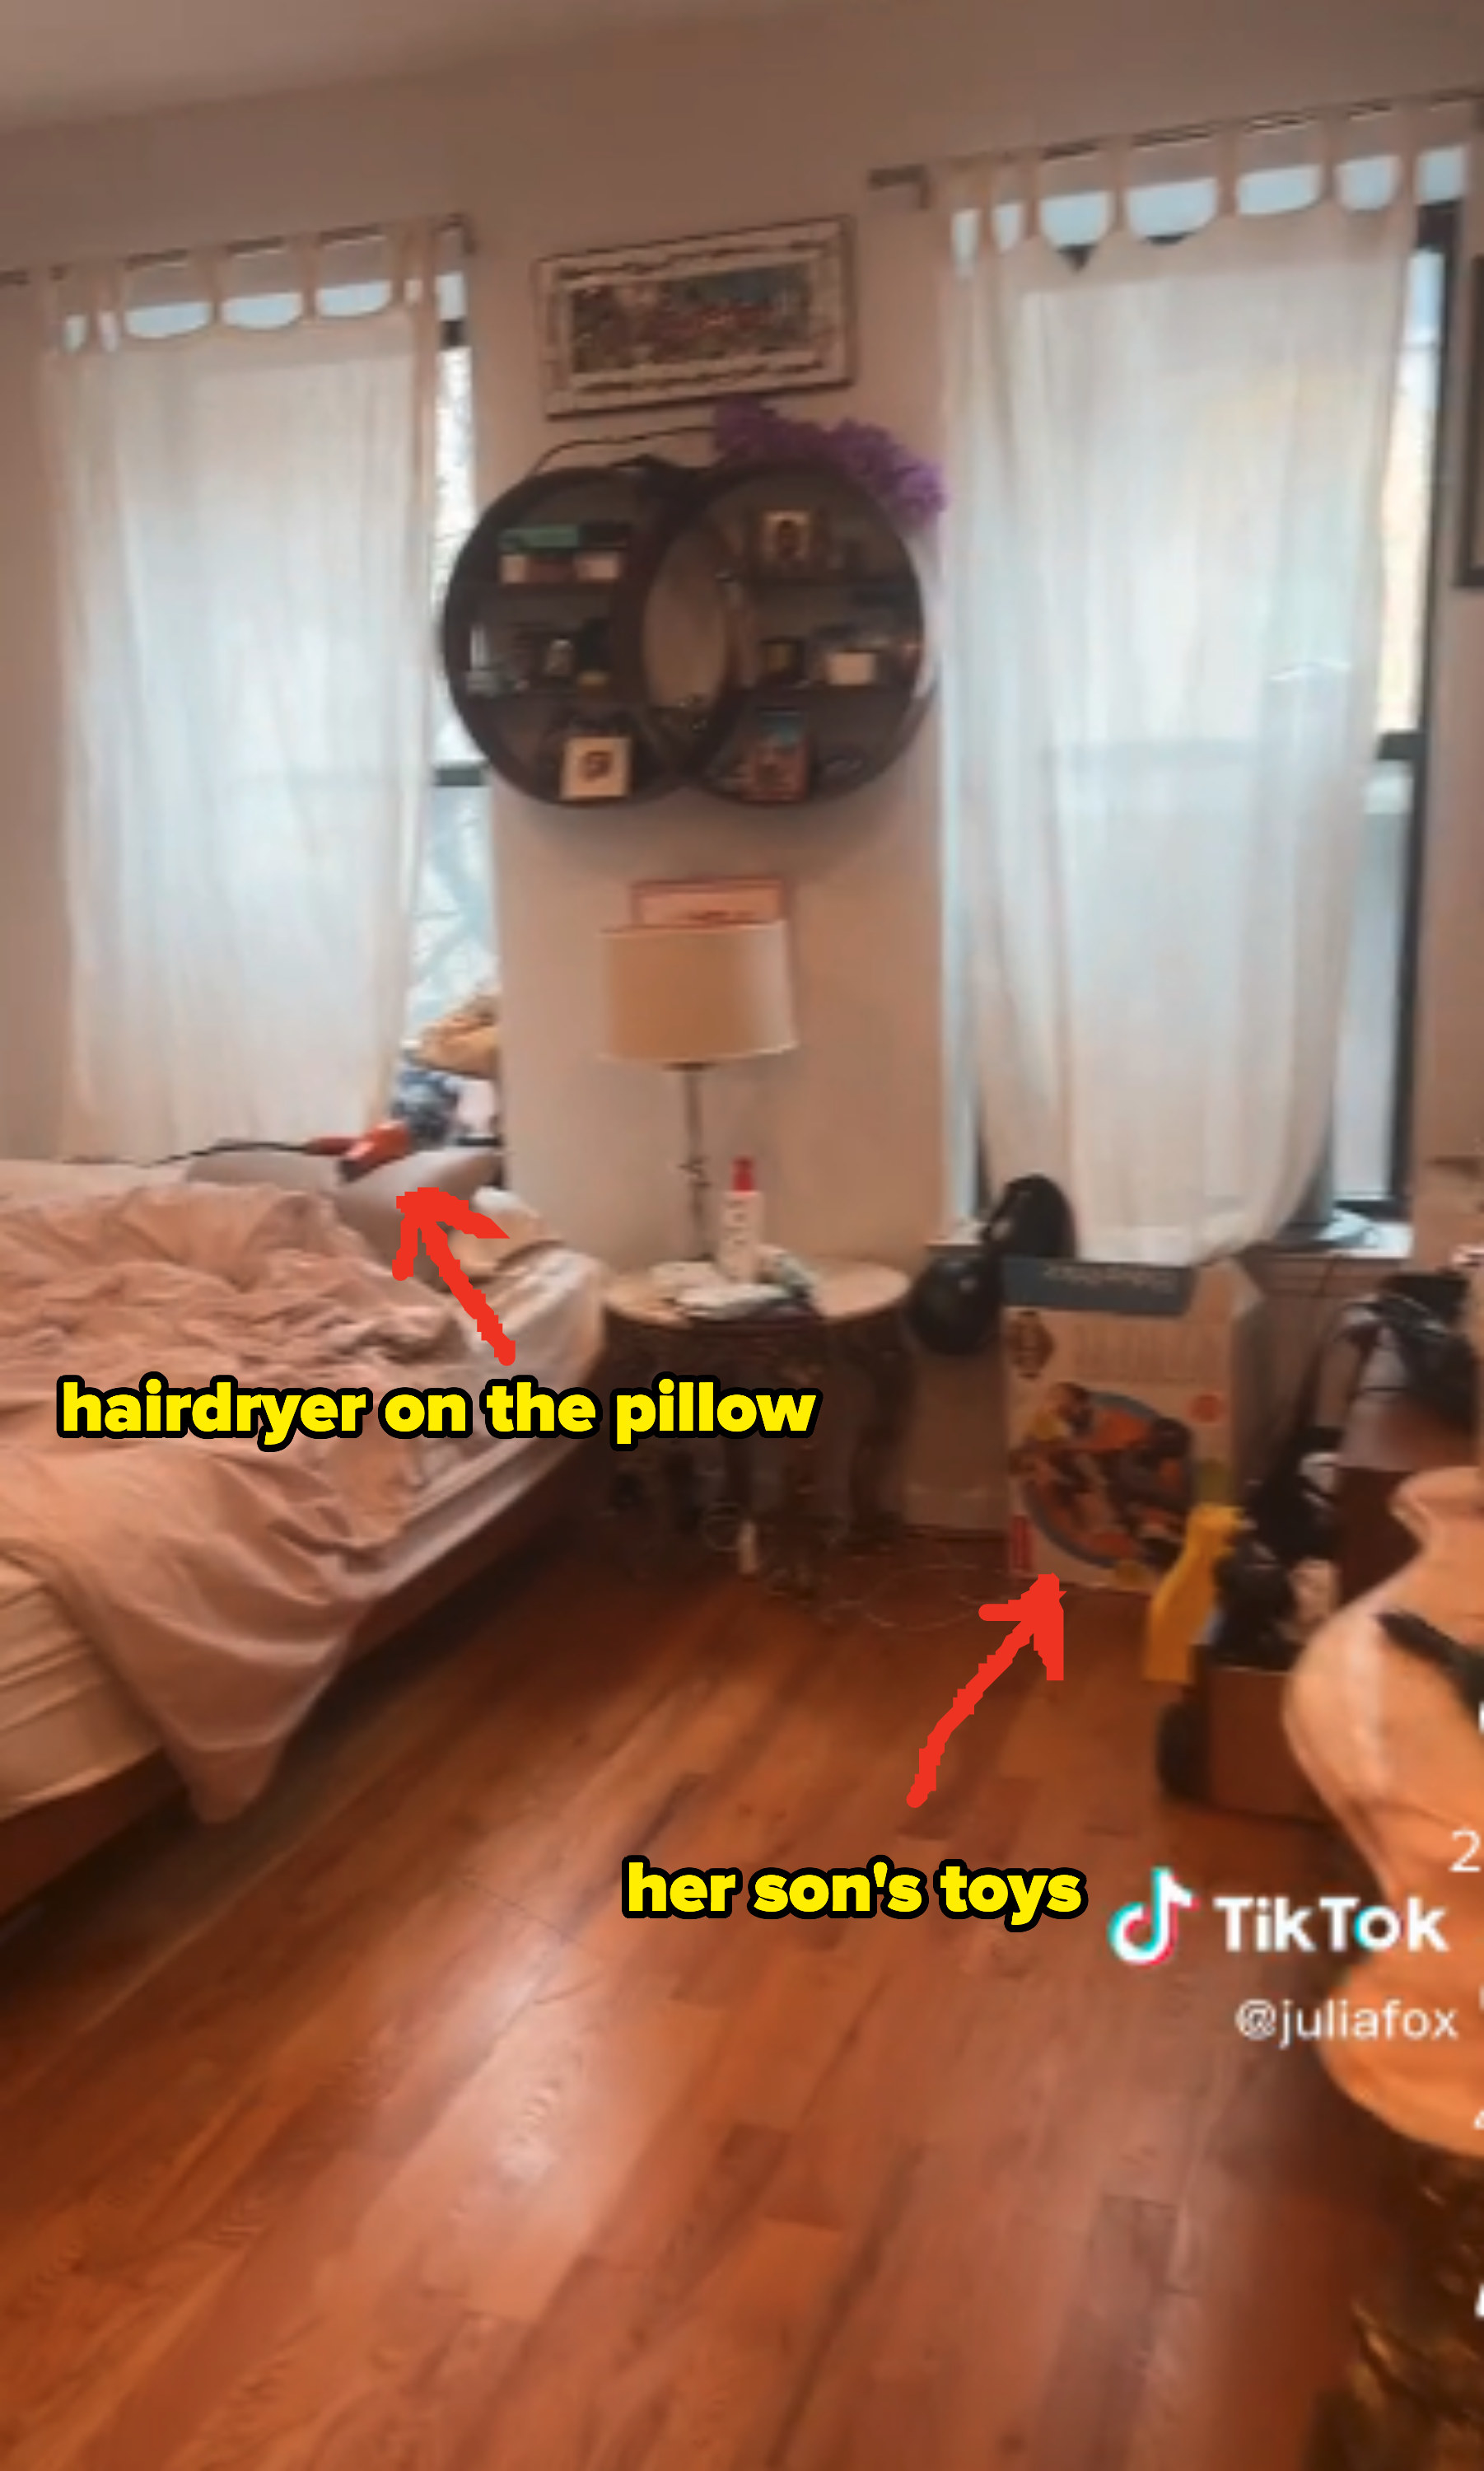 Julia&#x27;s unmade bed in on the left underneath one of the windows with a hairdryer lying on the pillow. Her son&#x27;s toys are also strewn about the room